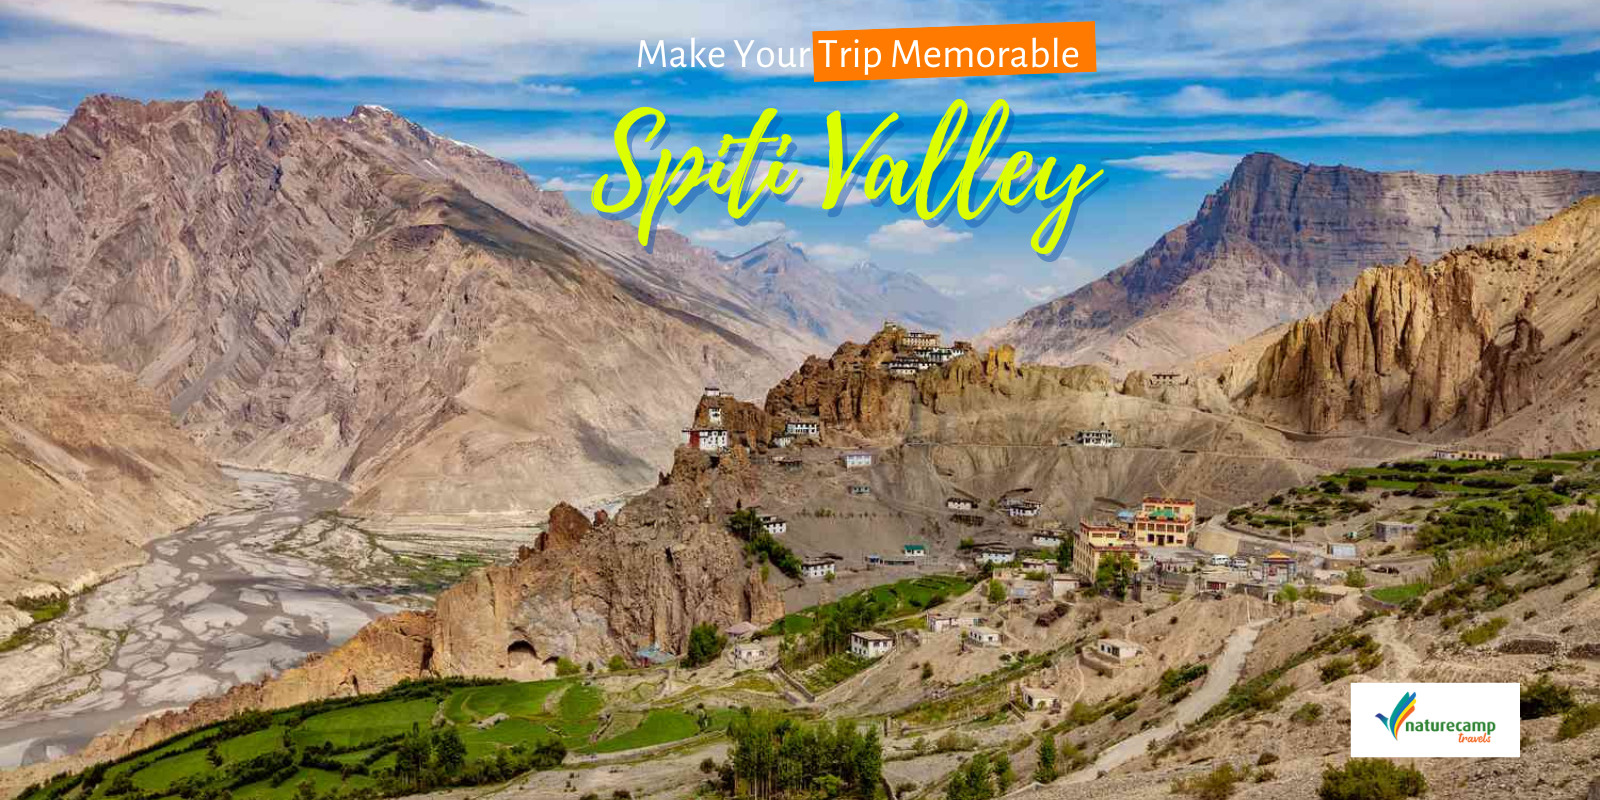 Top Activities to do in Spiti Valley to Make Your Trip Memorable